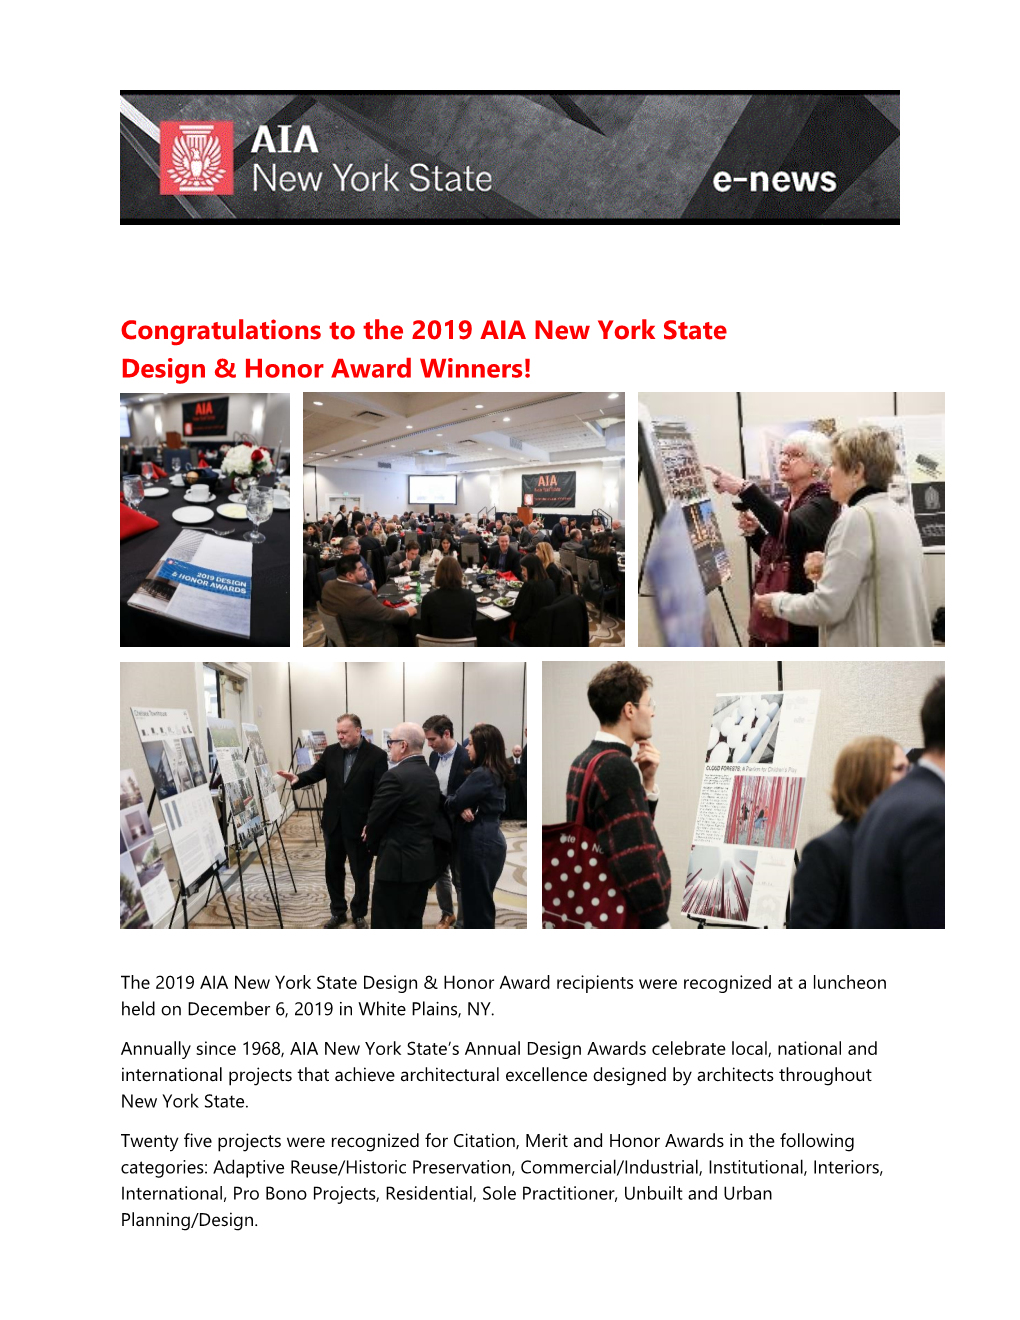 Congratulations to the 2019 AIA New York State Design & Honor Award